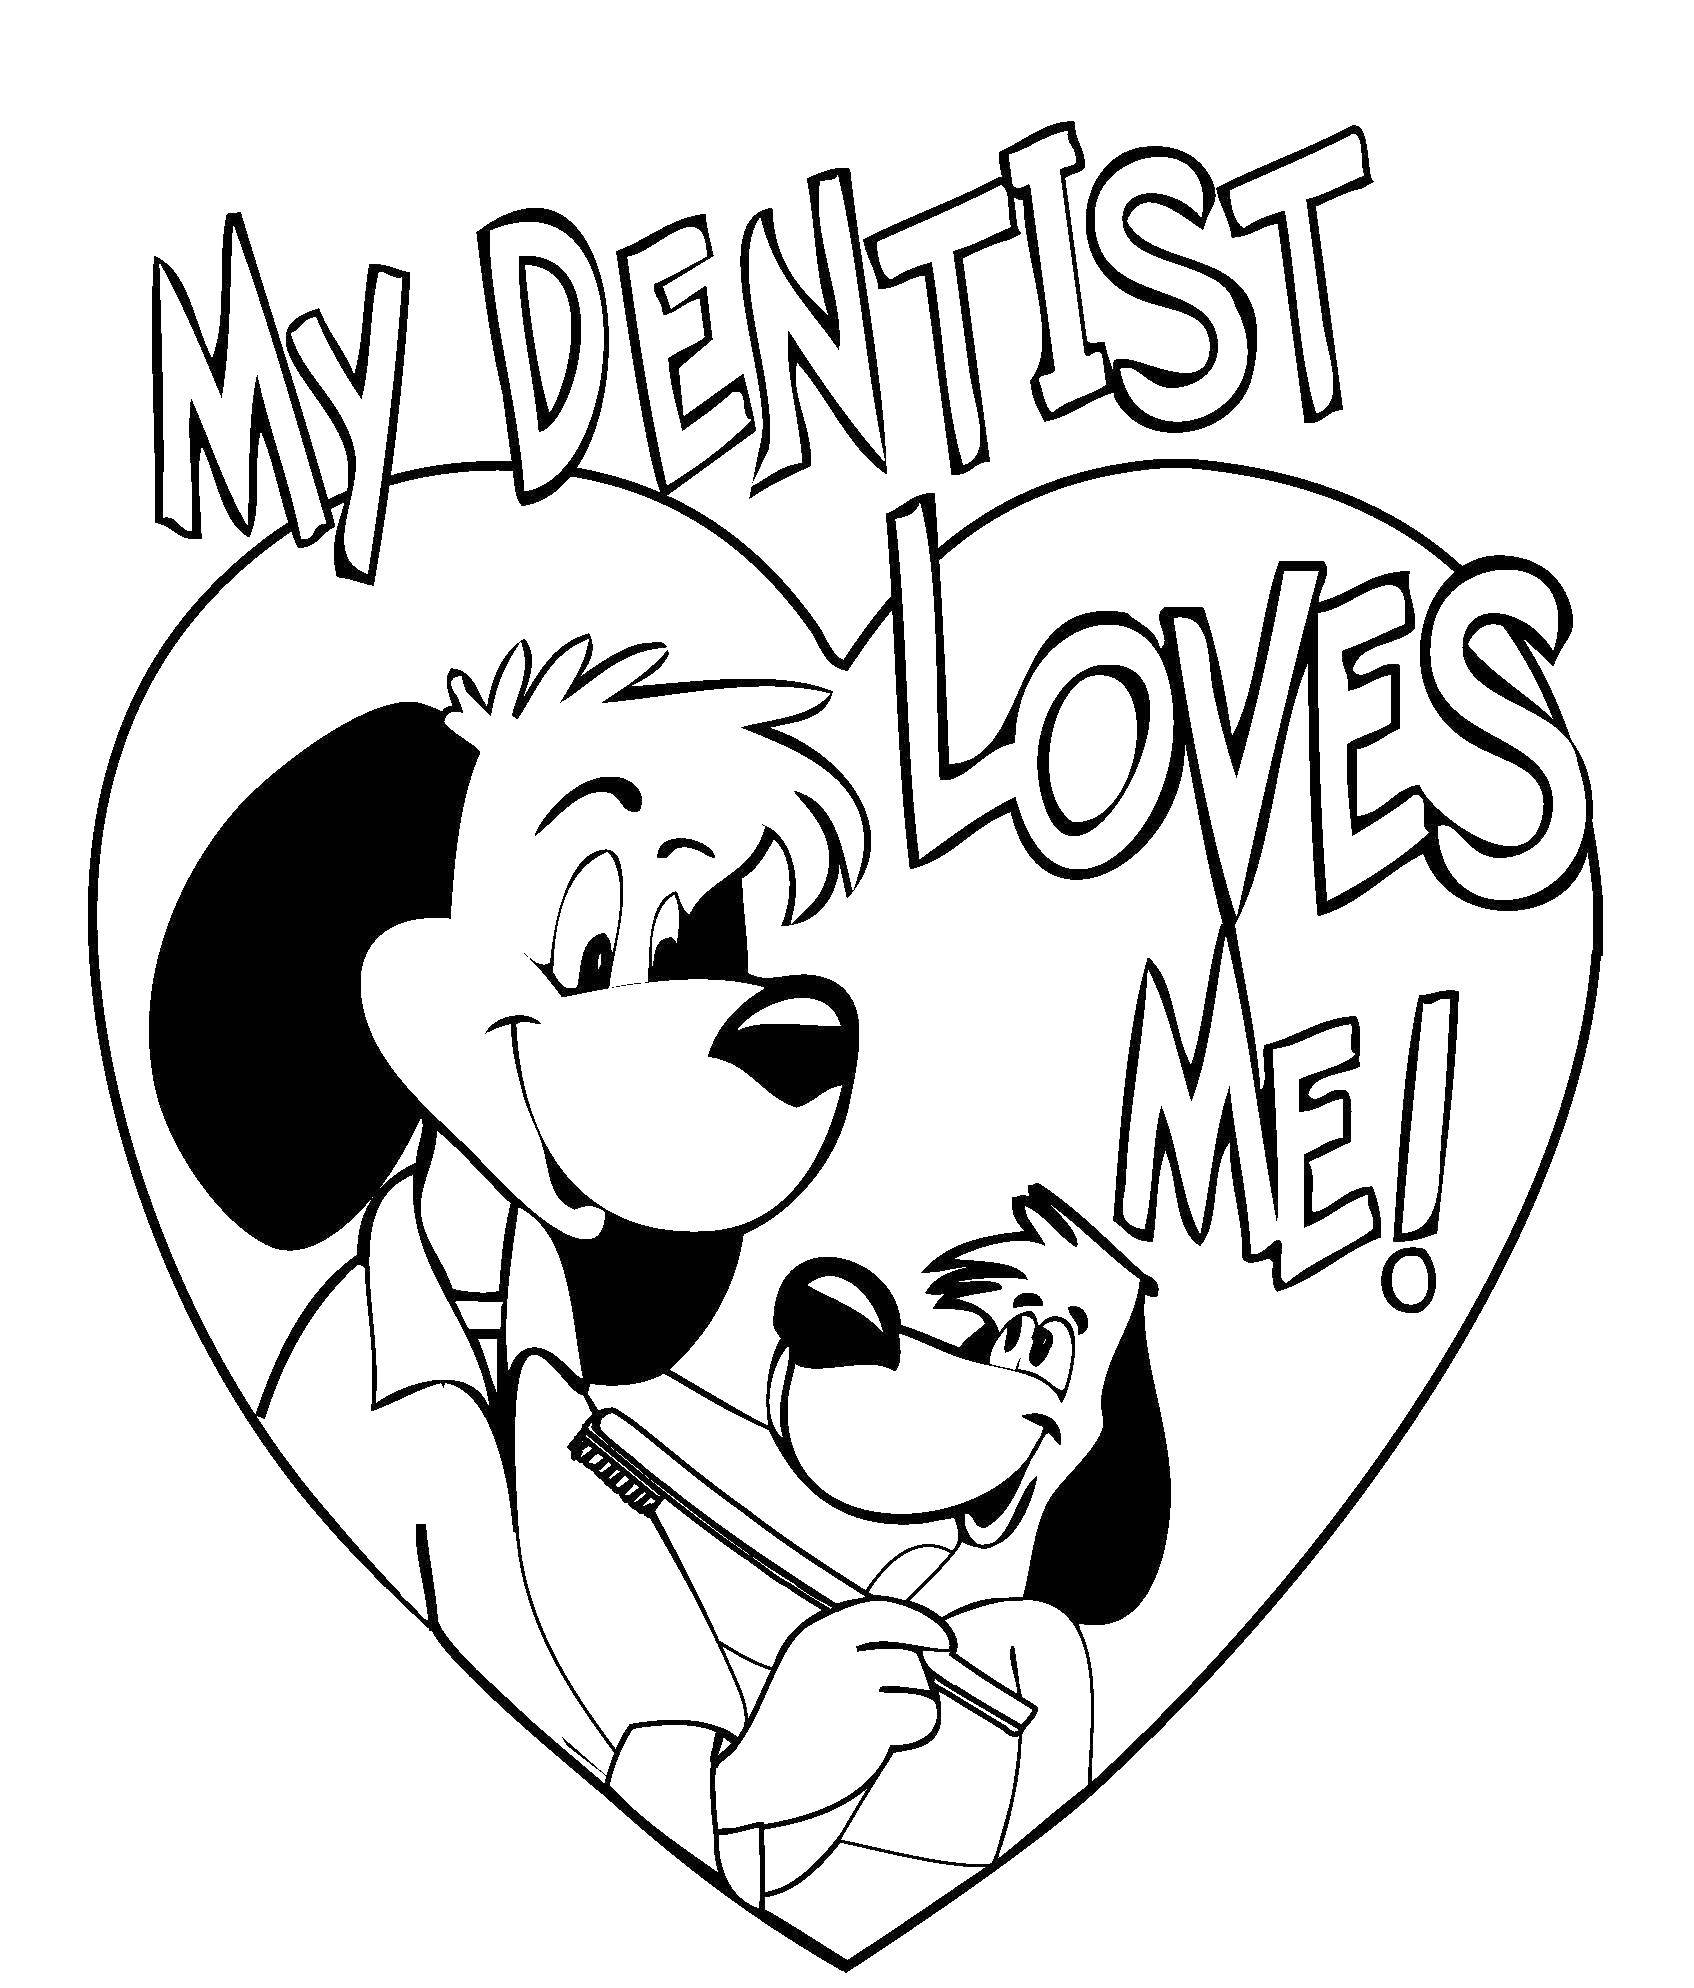 Coloring My dentist loves me. Category The care of teeth. Tags:  The care of teeth.